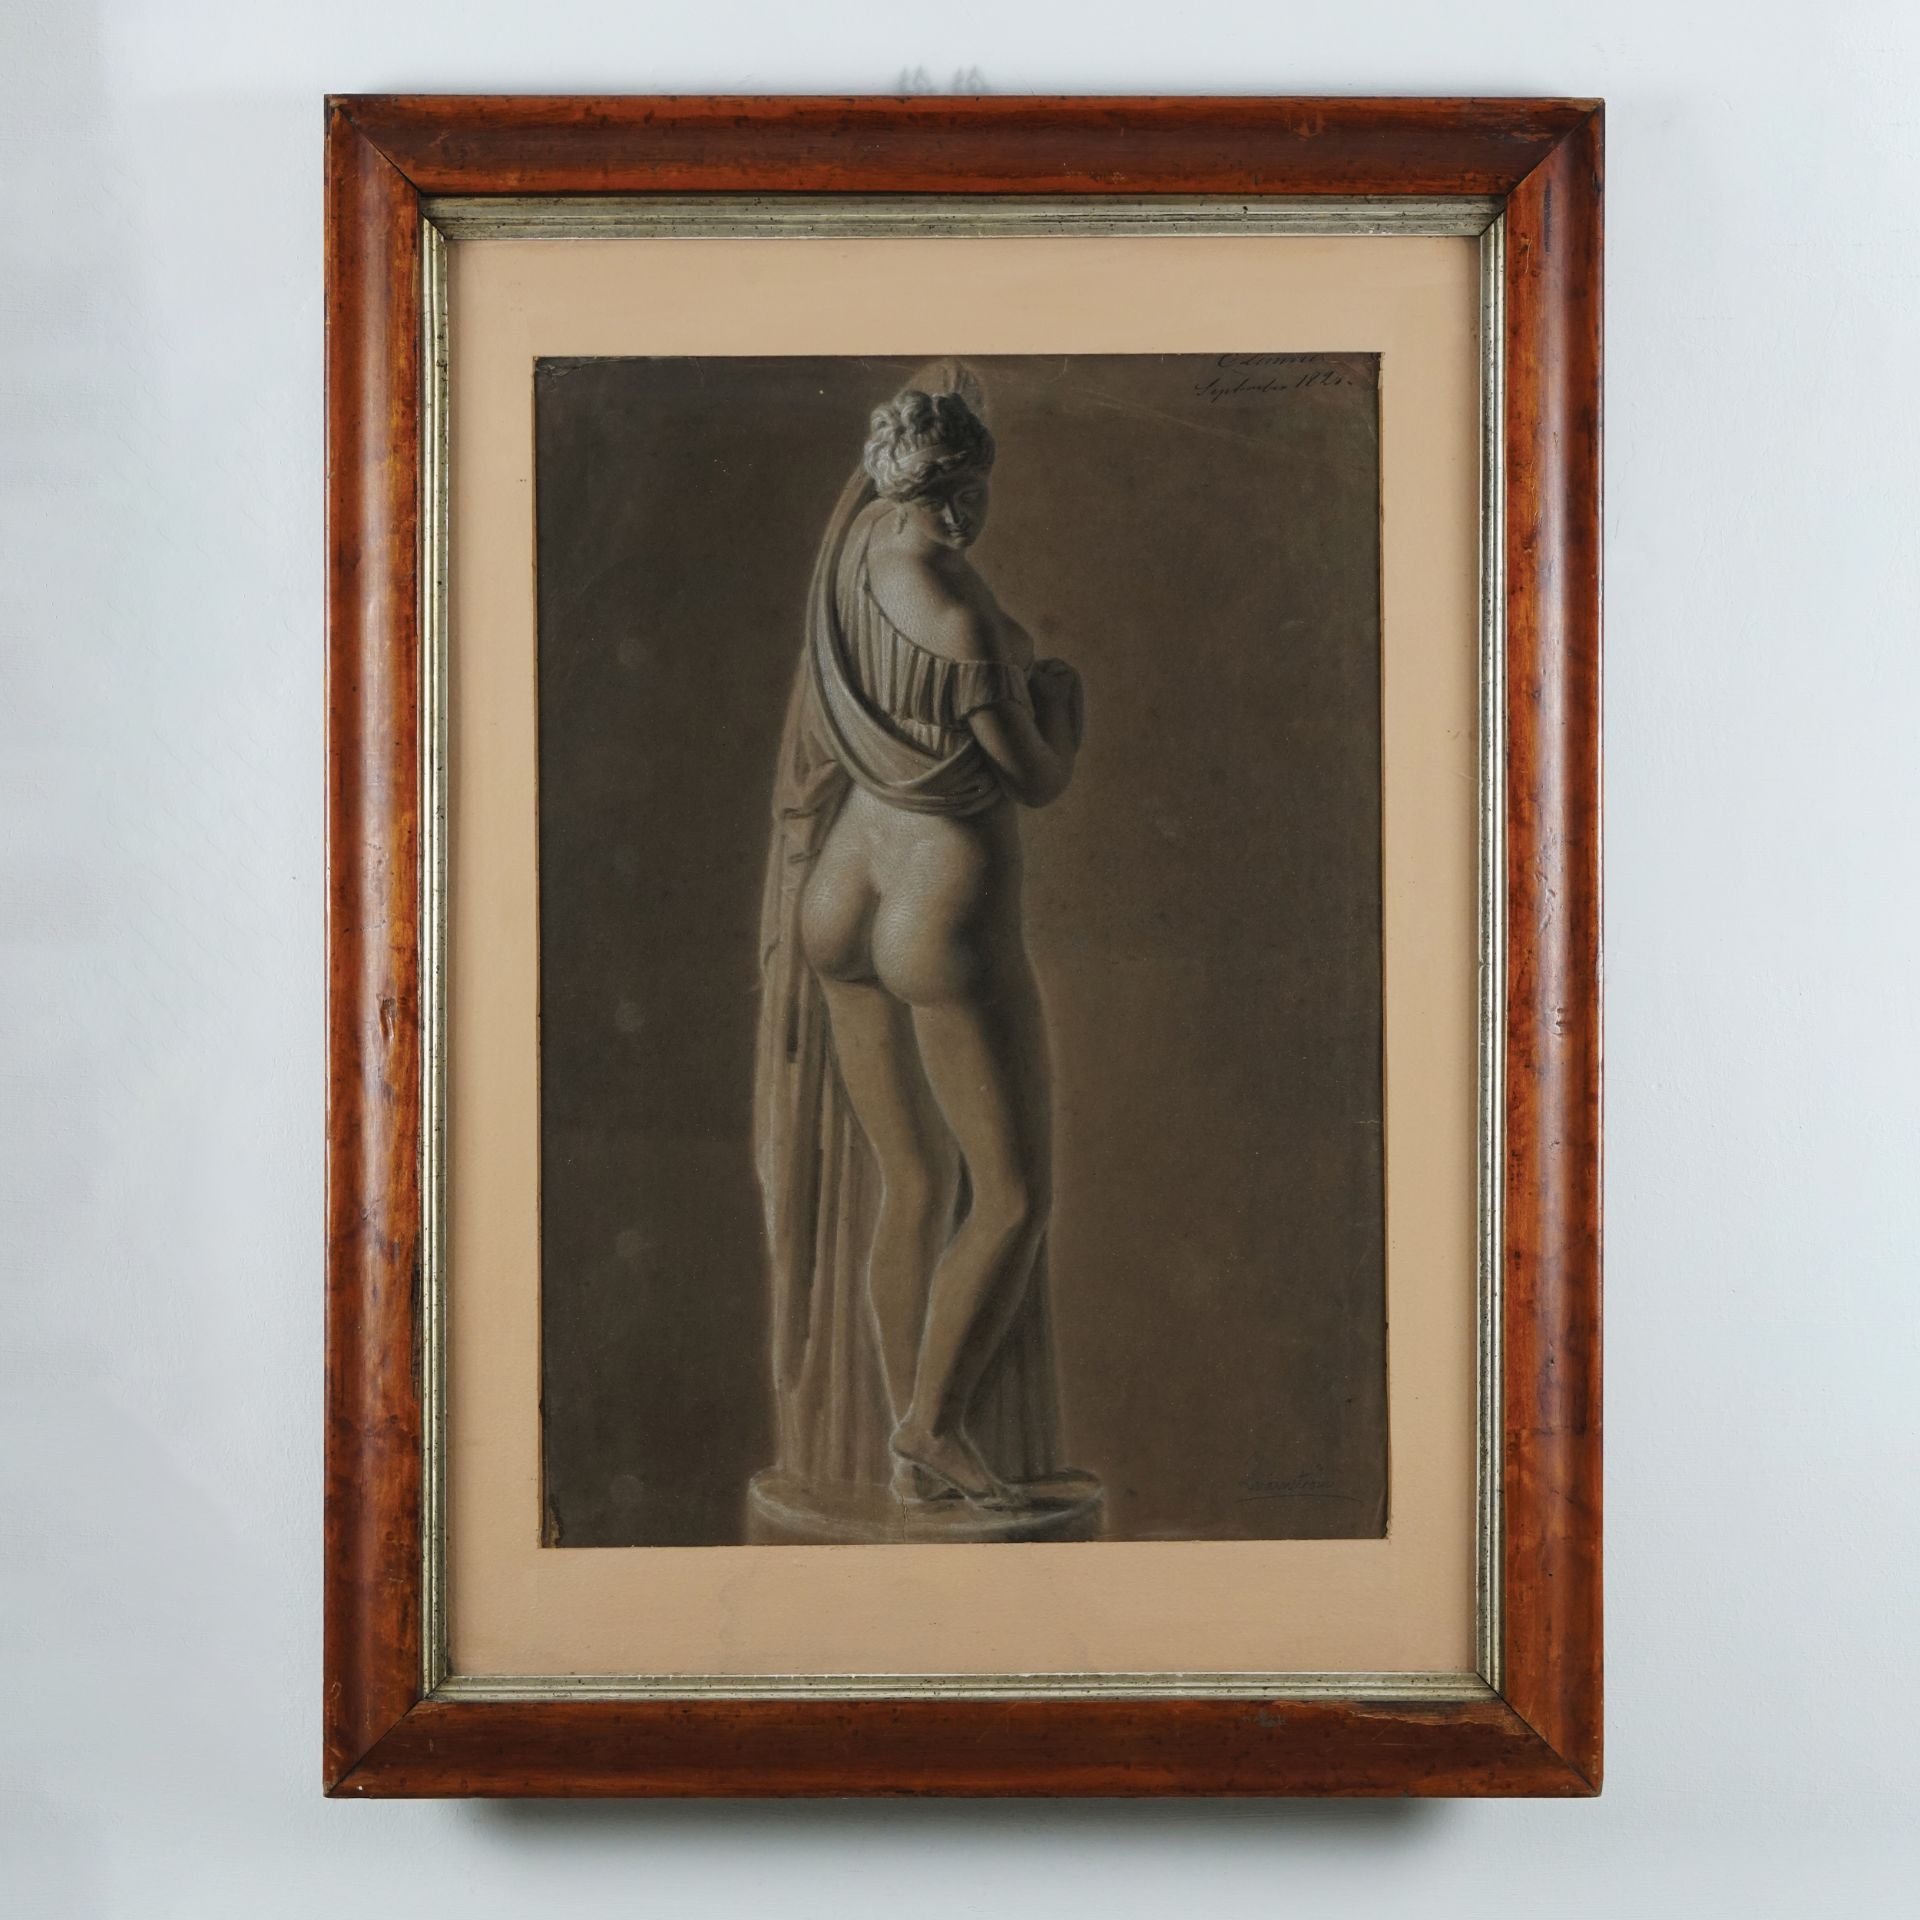 19th century painter Venus, 1828pencil and biacca on paper, 57by40cm.